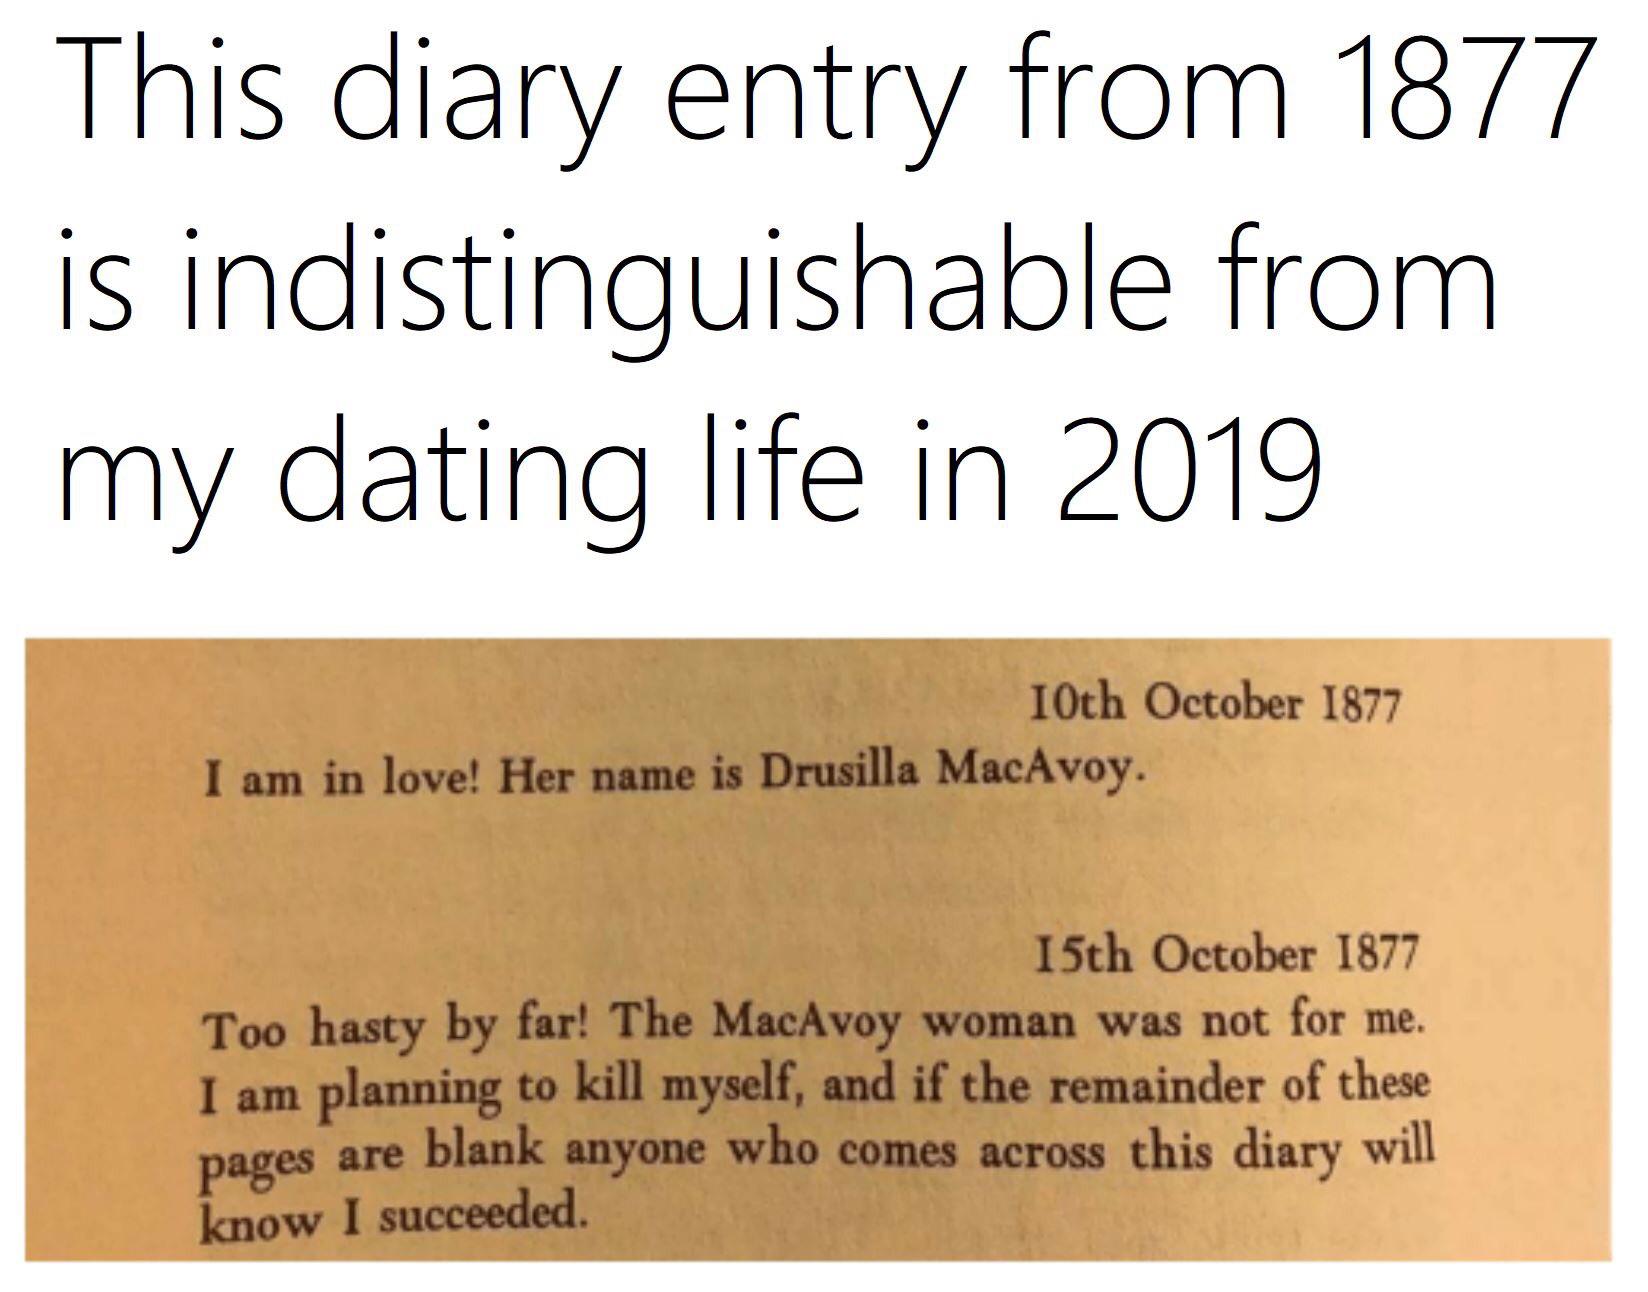 depression depression-memes depression text: This diary entry from 1877 is indistinguishable from my dating life in 2019 10th October 1877 I am in love! Her name is Drusilla MacAvoy. 15th October 1877 Too hasty by far! The MacAvoy woman was not for me. I am planning to kill myself, and if the remainder of these pages are blank anyone who comes across this diary will know I succeeded. 